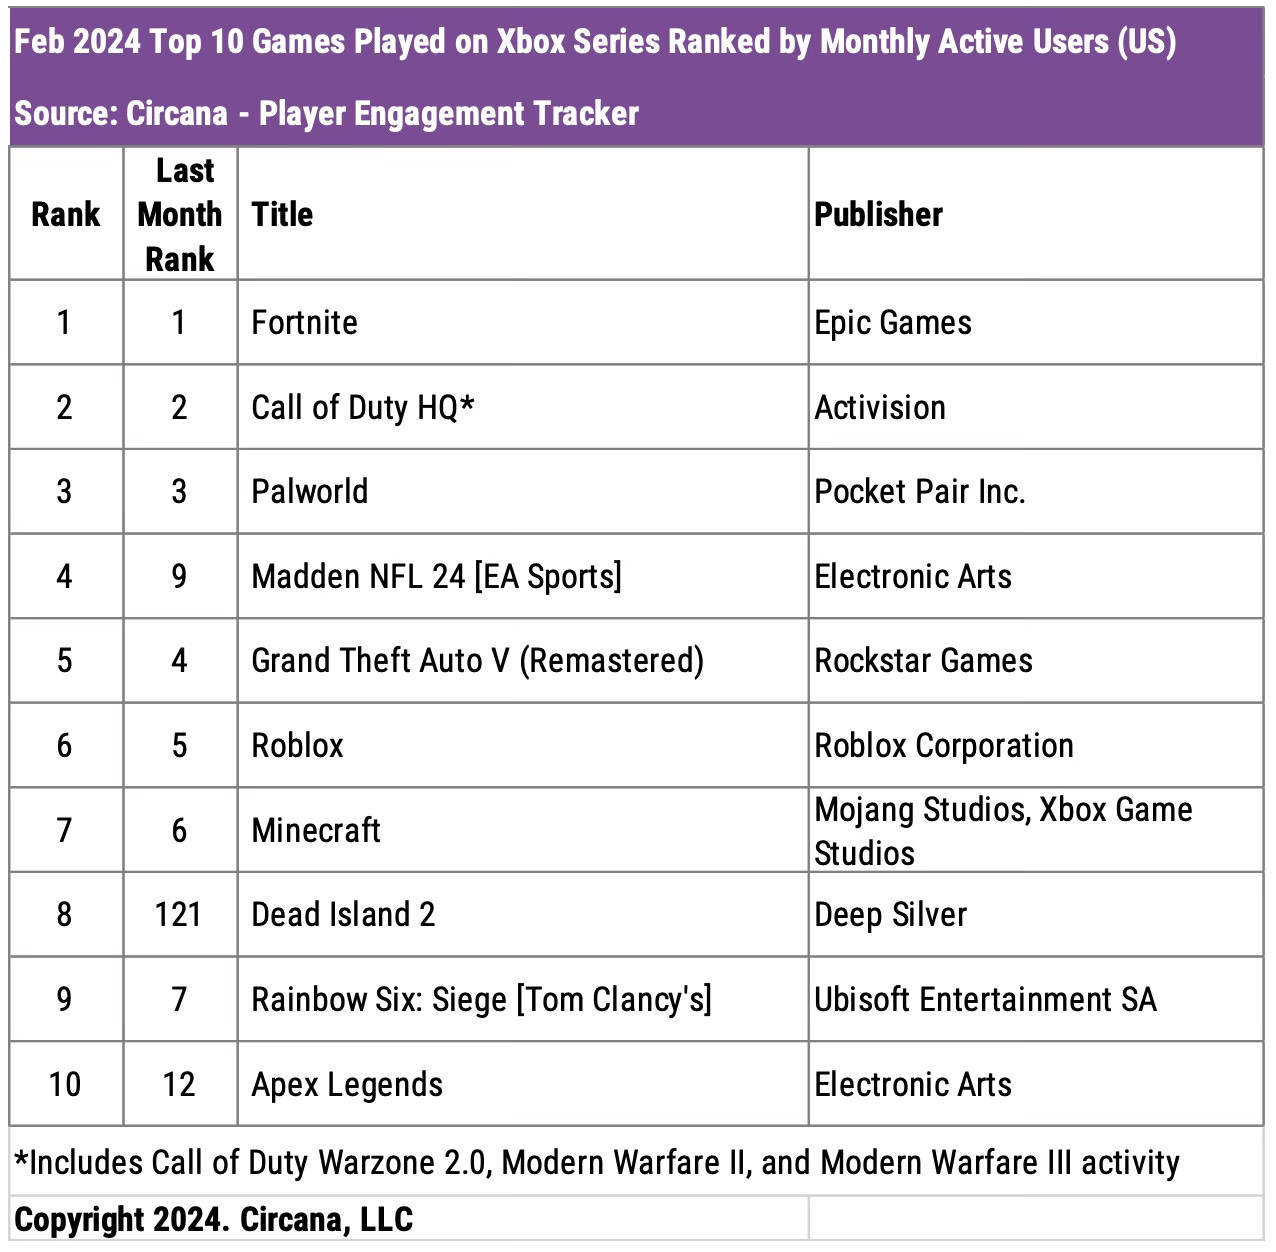 Chart showing the top 10 most-played games on Xbox Series in the U.S. in February 2024 ranked by monthly active users